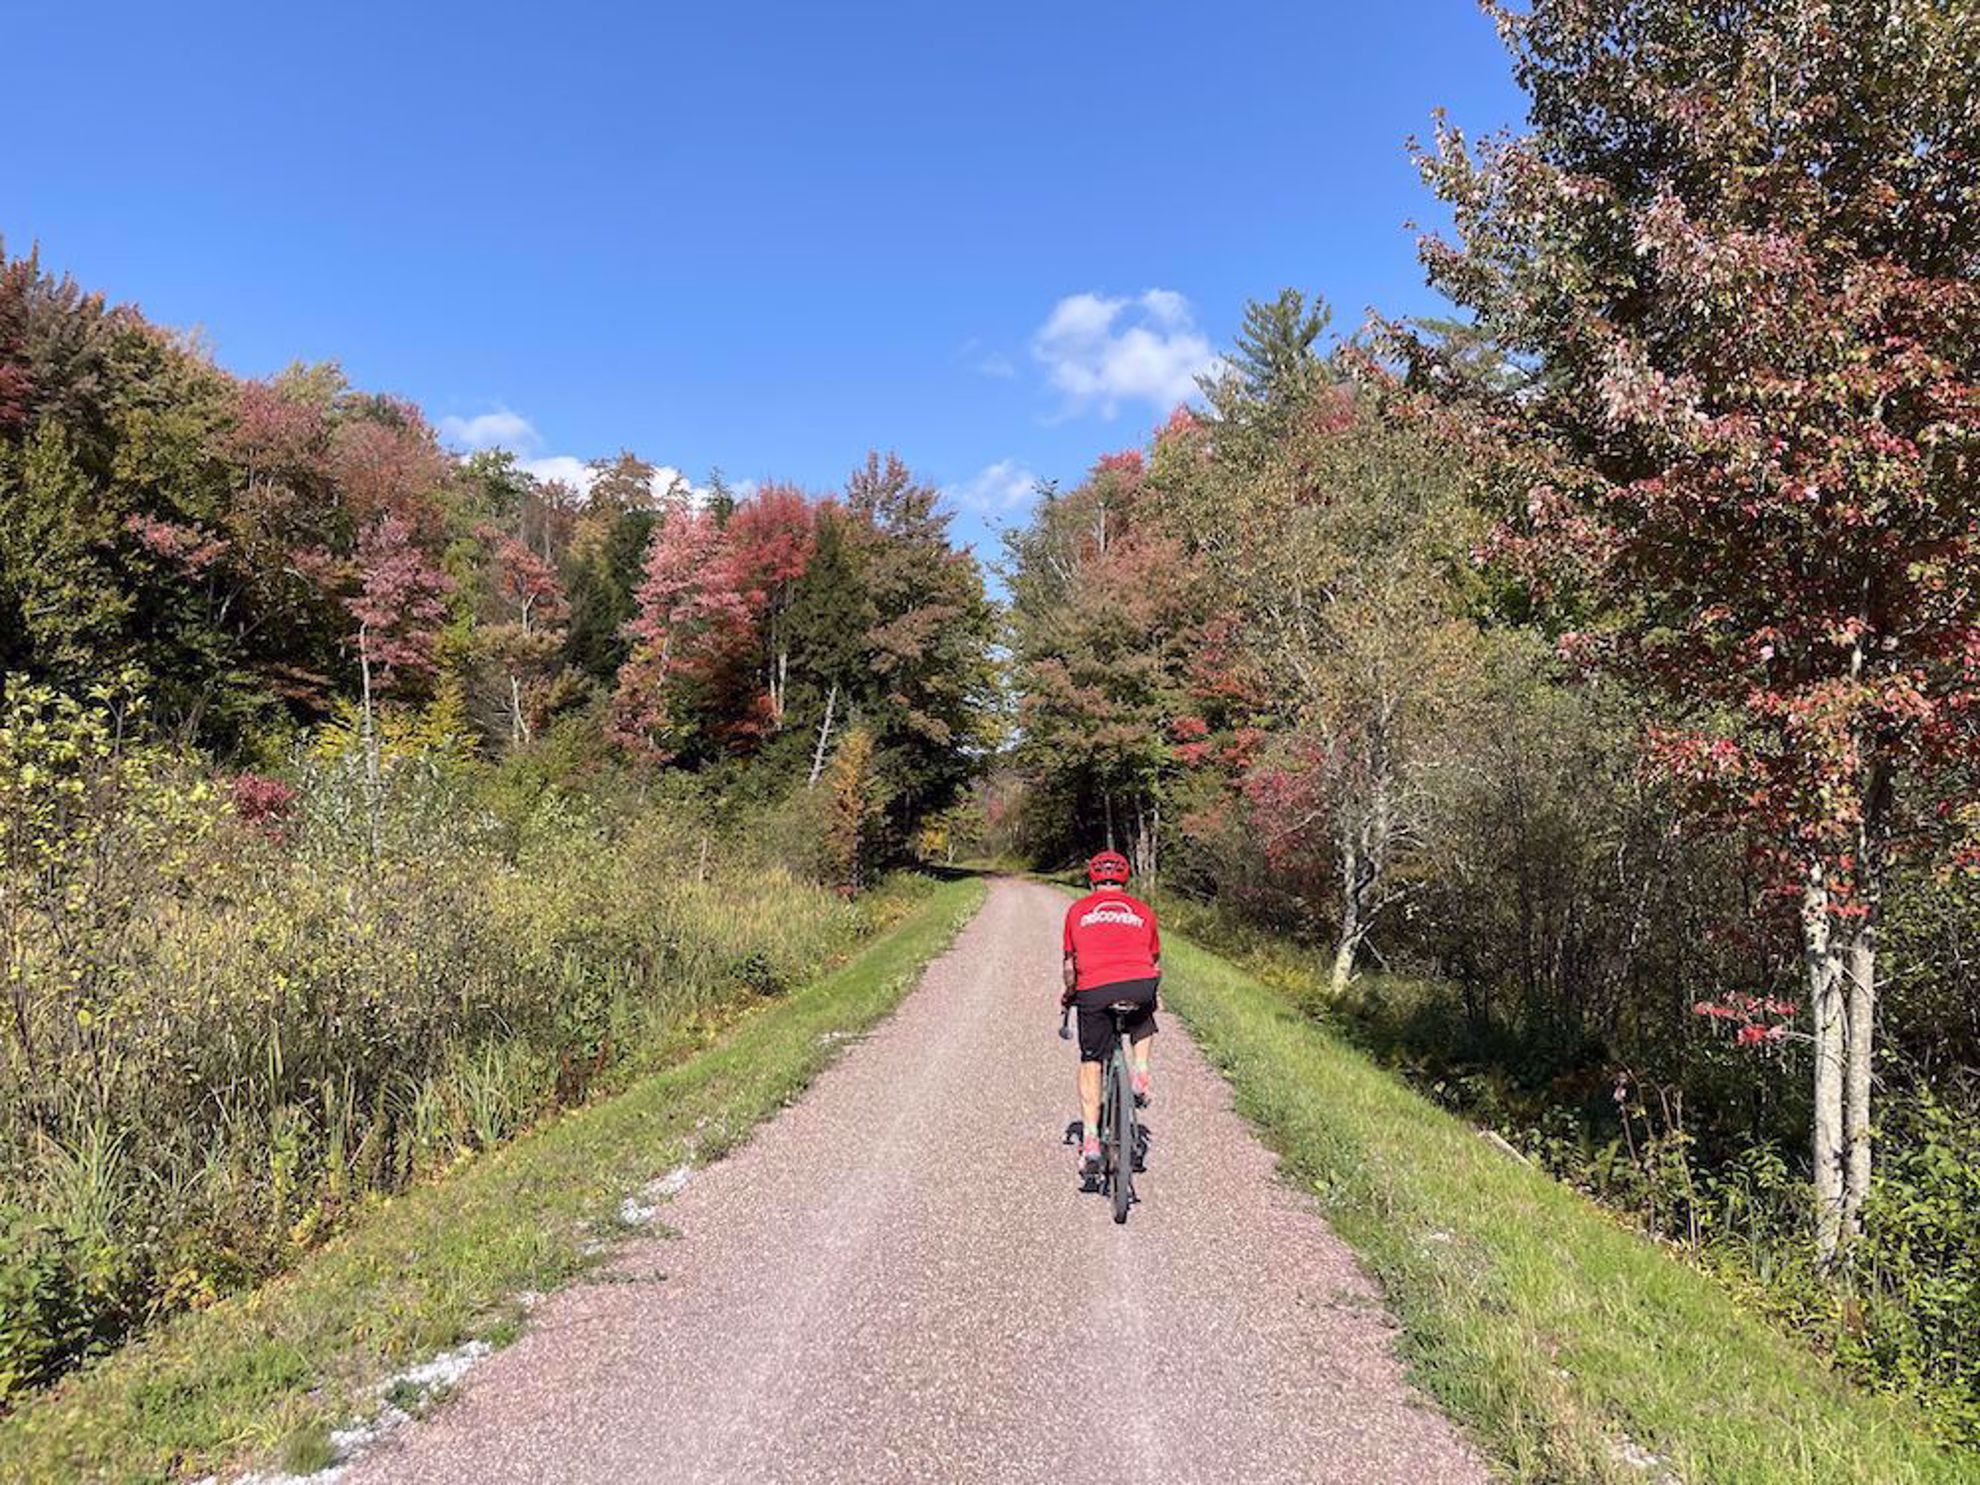 Riding the trail with fall colors